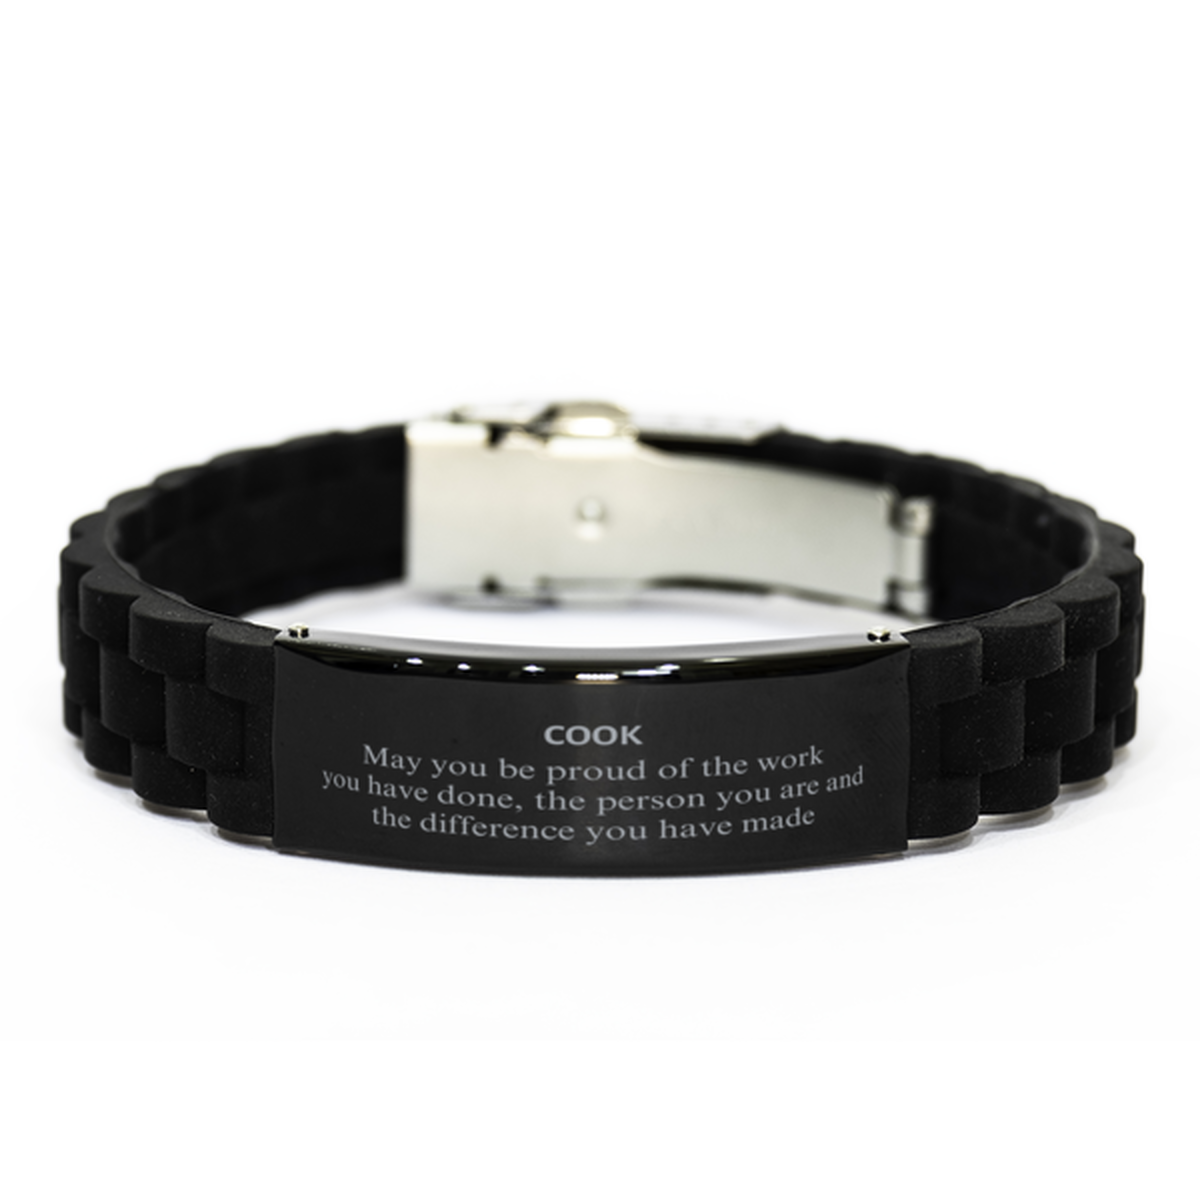 Cook May you be proud of the work you have done, Retirement Cook Black Glidelock Clasp Bracelet for Colleague Appreciation Gifts Amazing for Cook